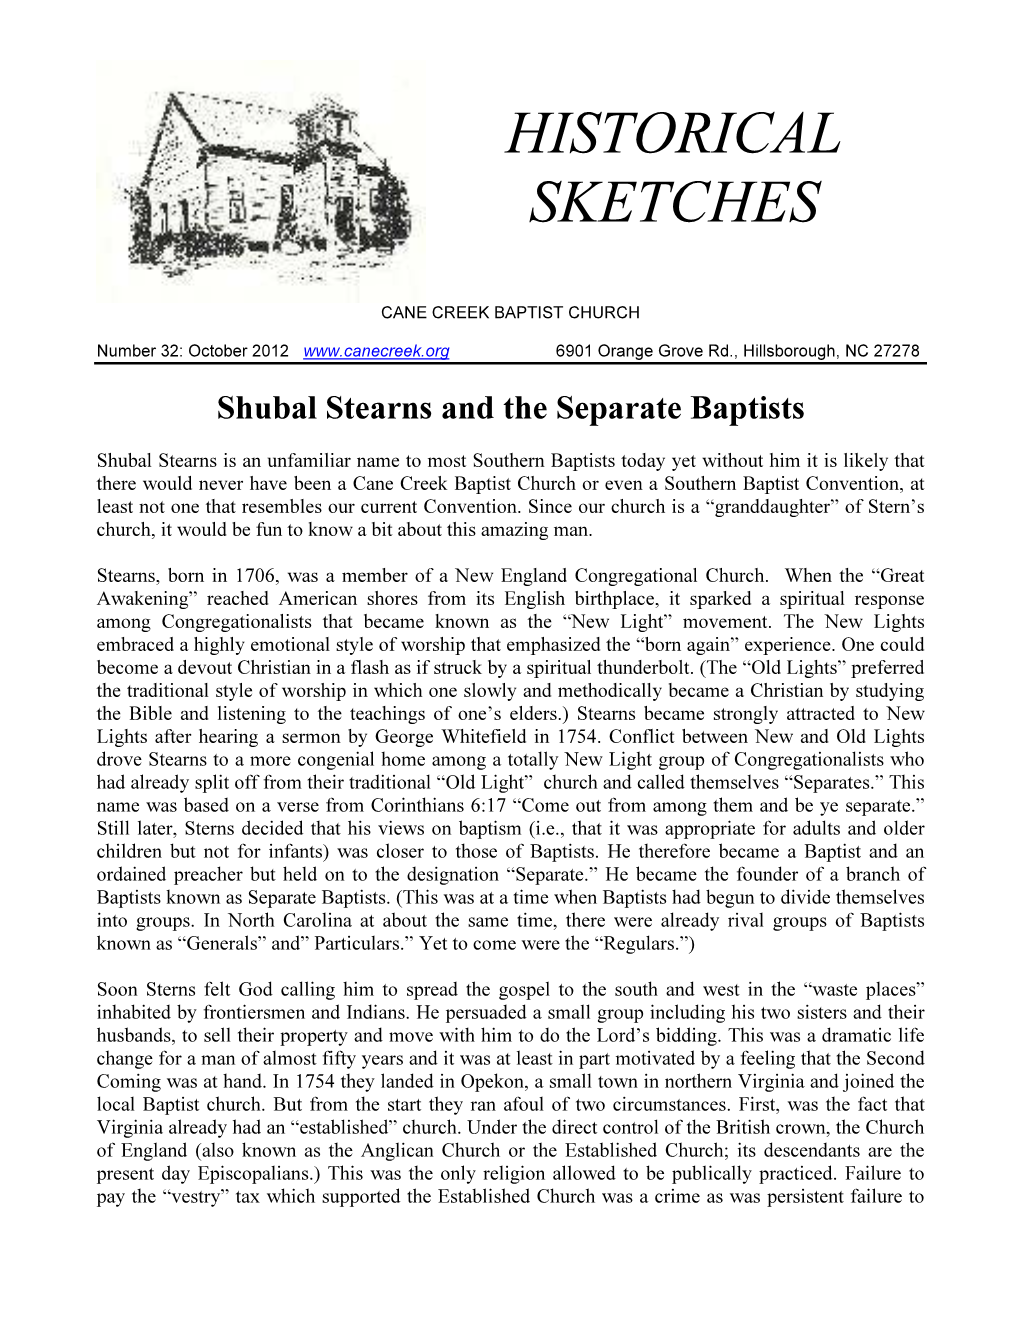 Shubal Stearns and the Separate Baptists